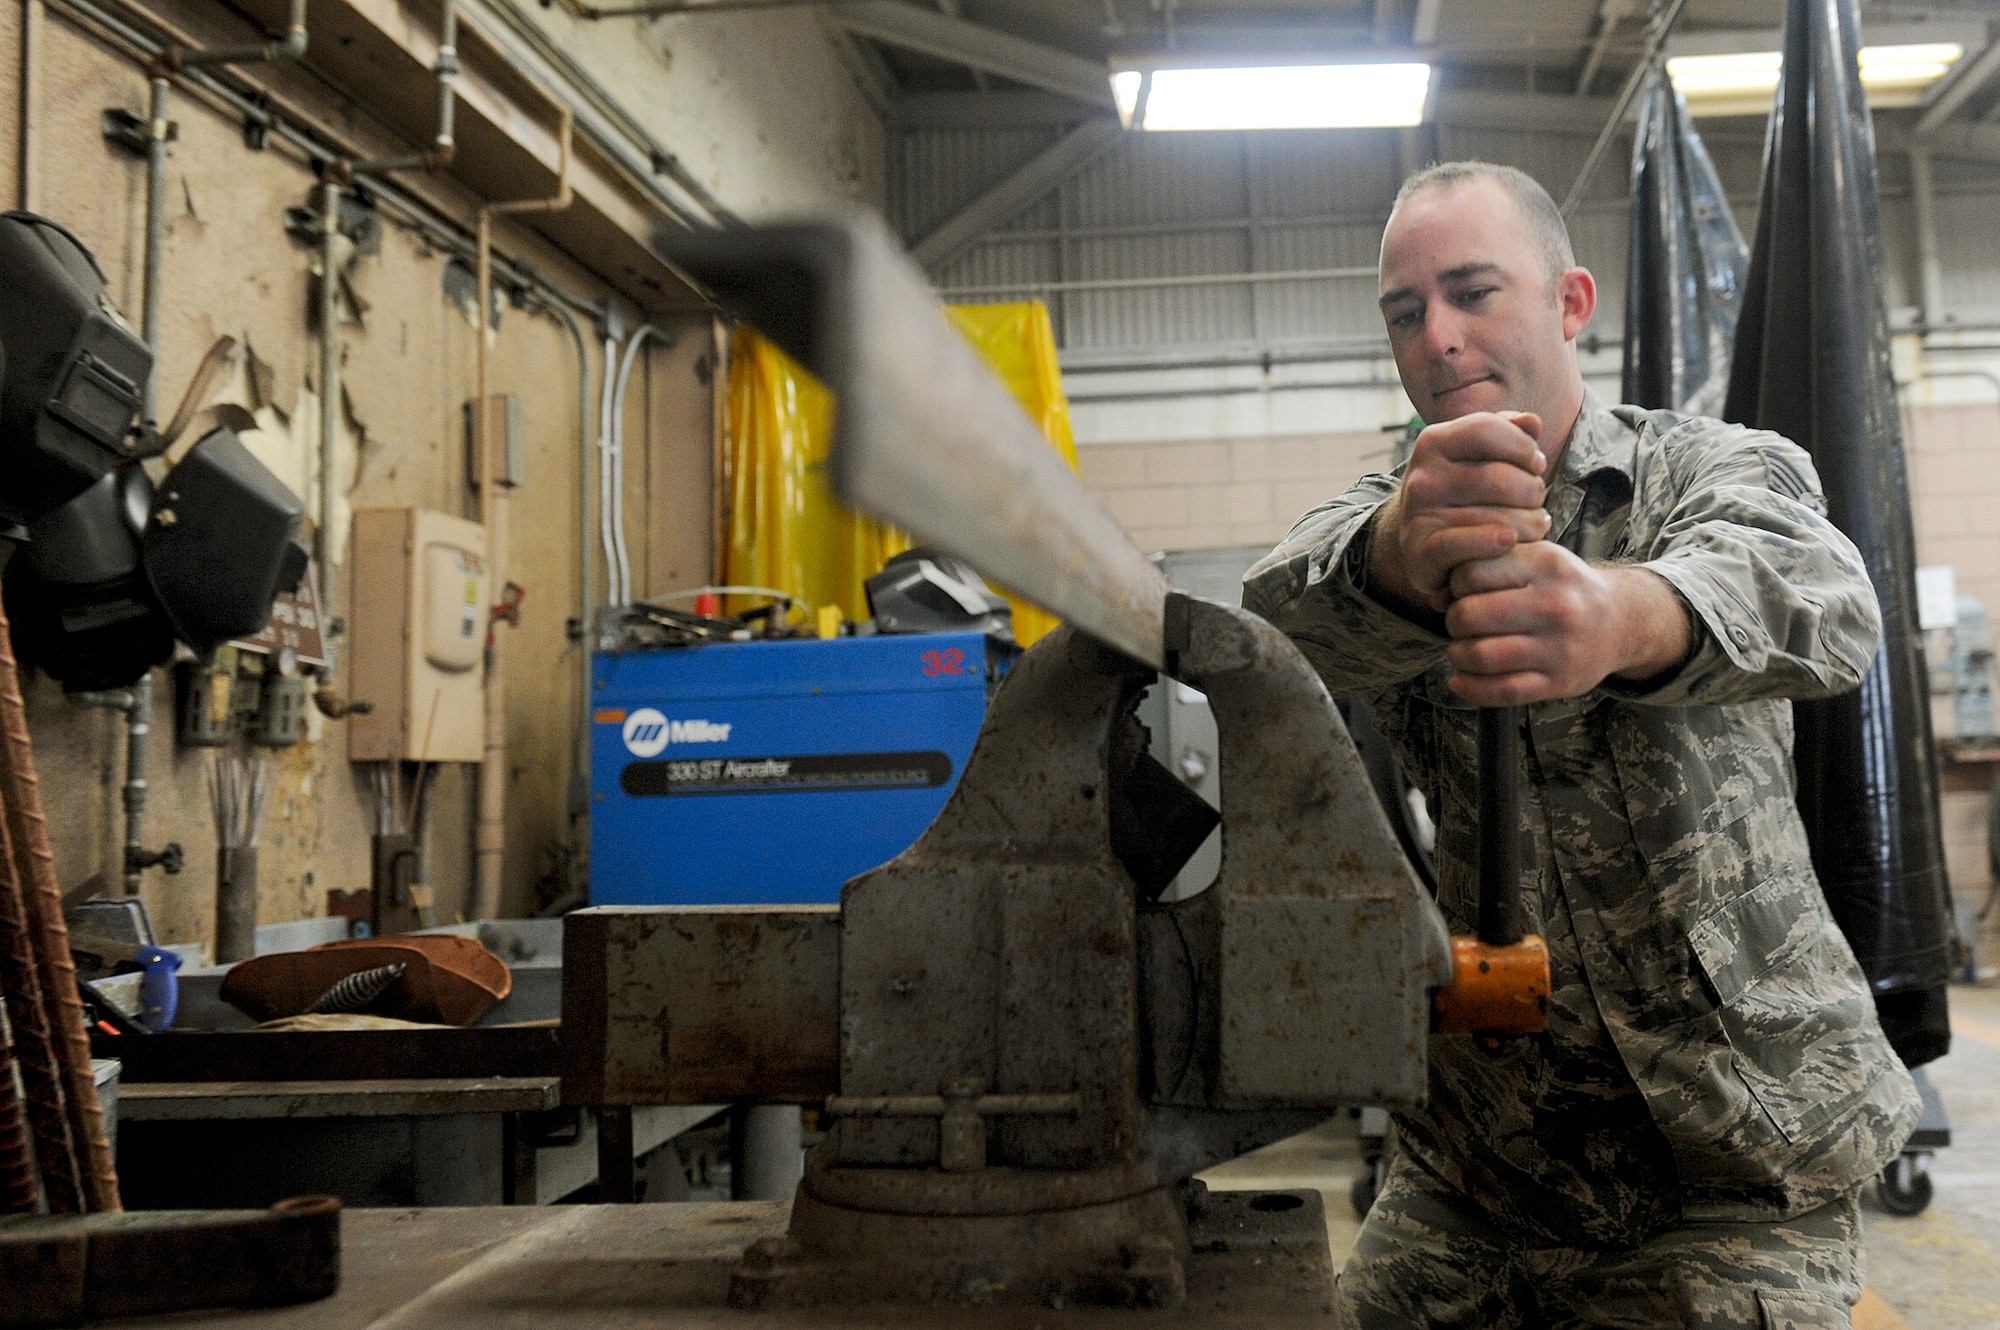 Staff Sgt. Jason Vick clamps down a piece of angle iron for welding Jan 10, 2010, at Kadena Air Base, Japan. Sergeant Vick is a member of the 18th Civil Engineer Squadron's Operations Flight. The flight was recently awarded the 2010 Major General Clifton D. Wright Award, which recognizes the most outstanding CE operations flight in the performance of quality maintenance, repair, and improvement of installation facilities and infrastructure. (U.S. Air Force photo/Staff Sgt. Jonathan Steffen)